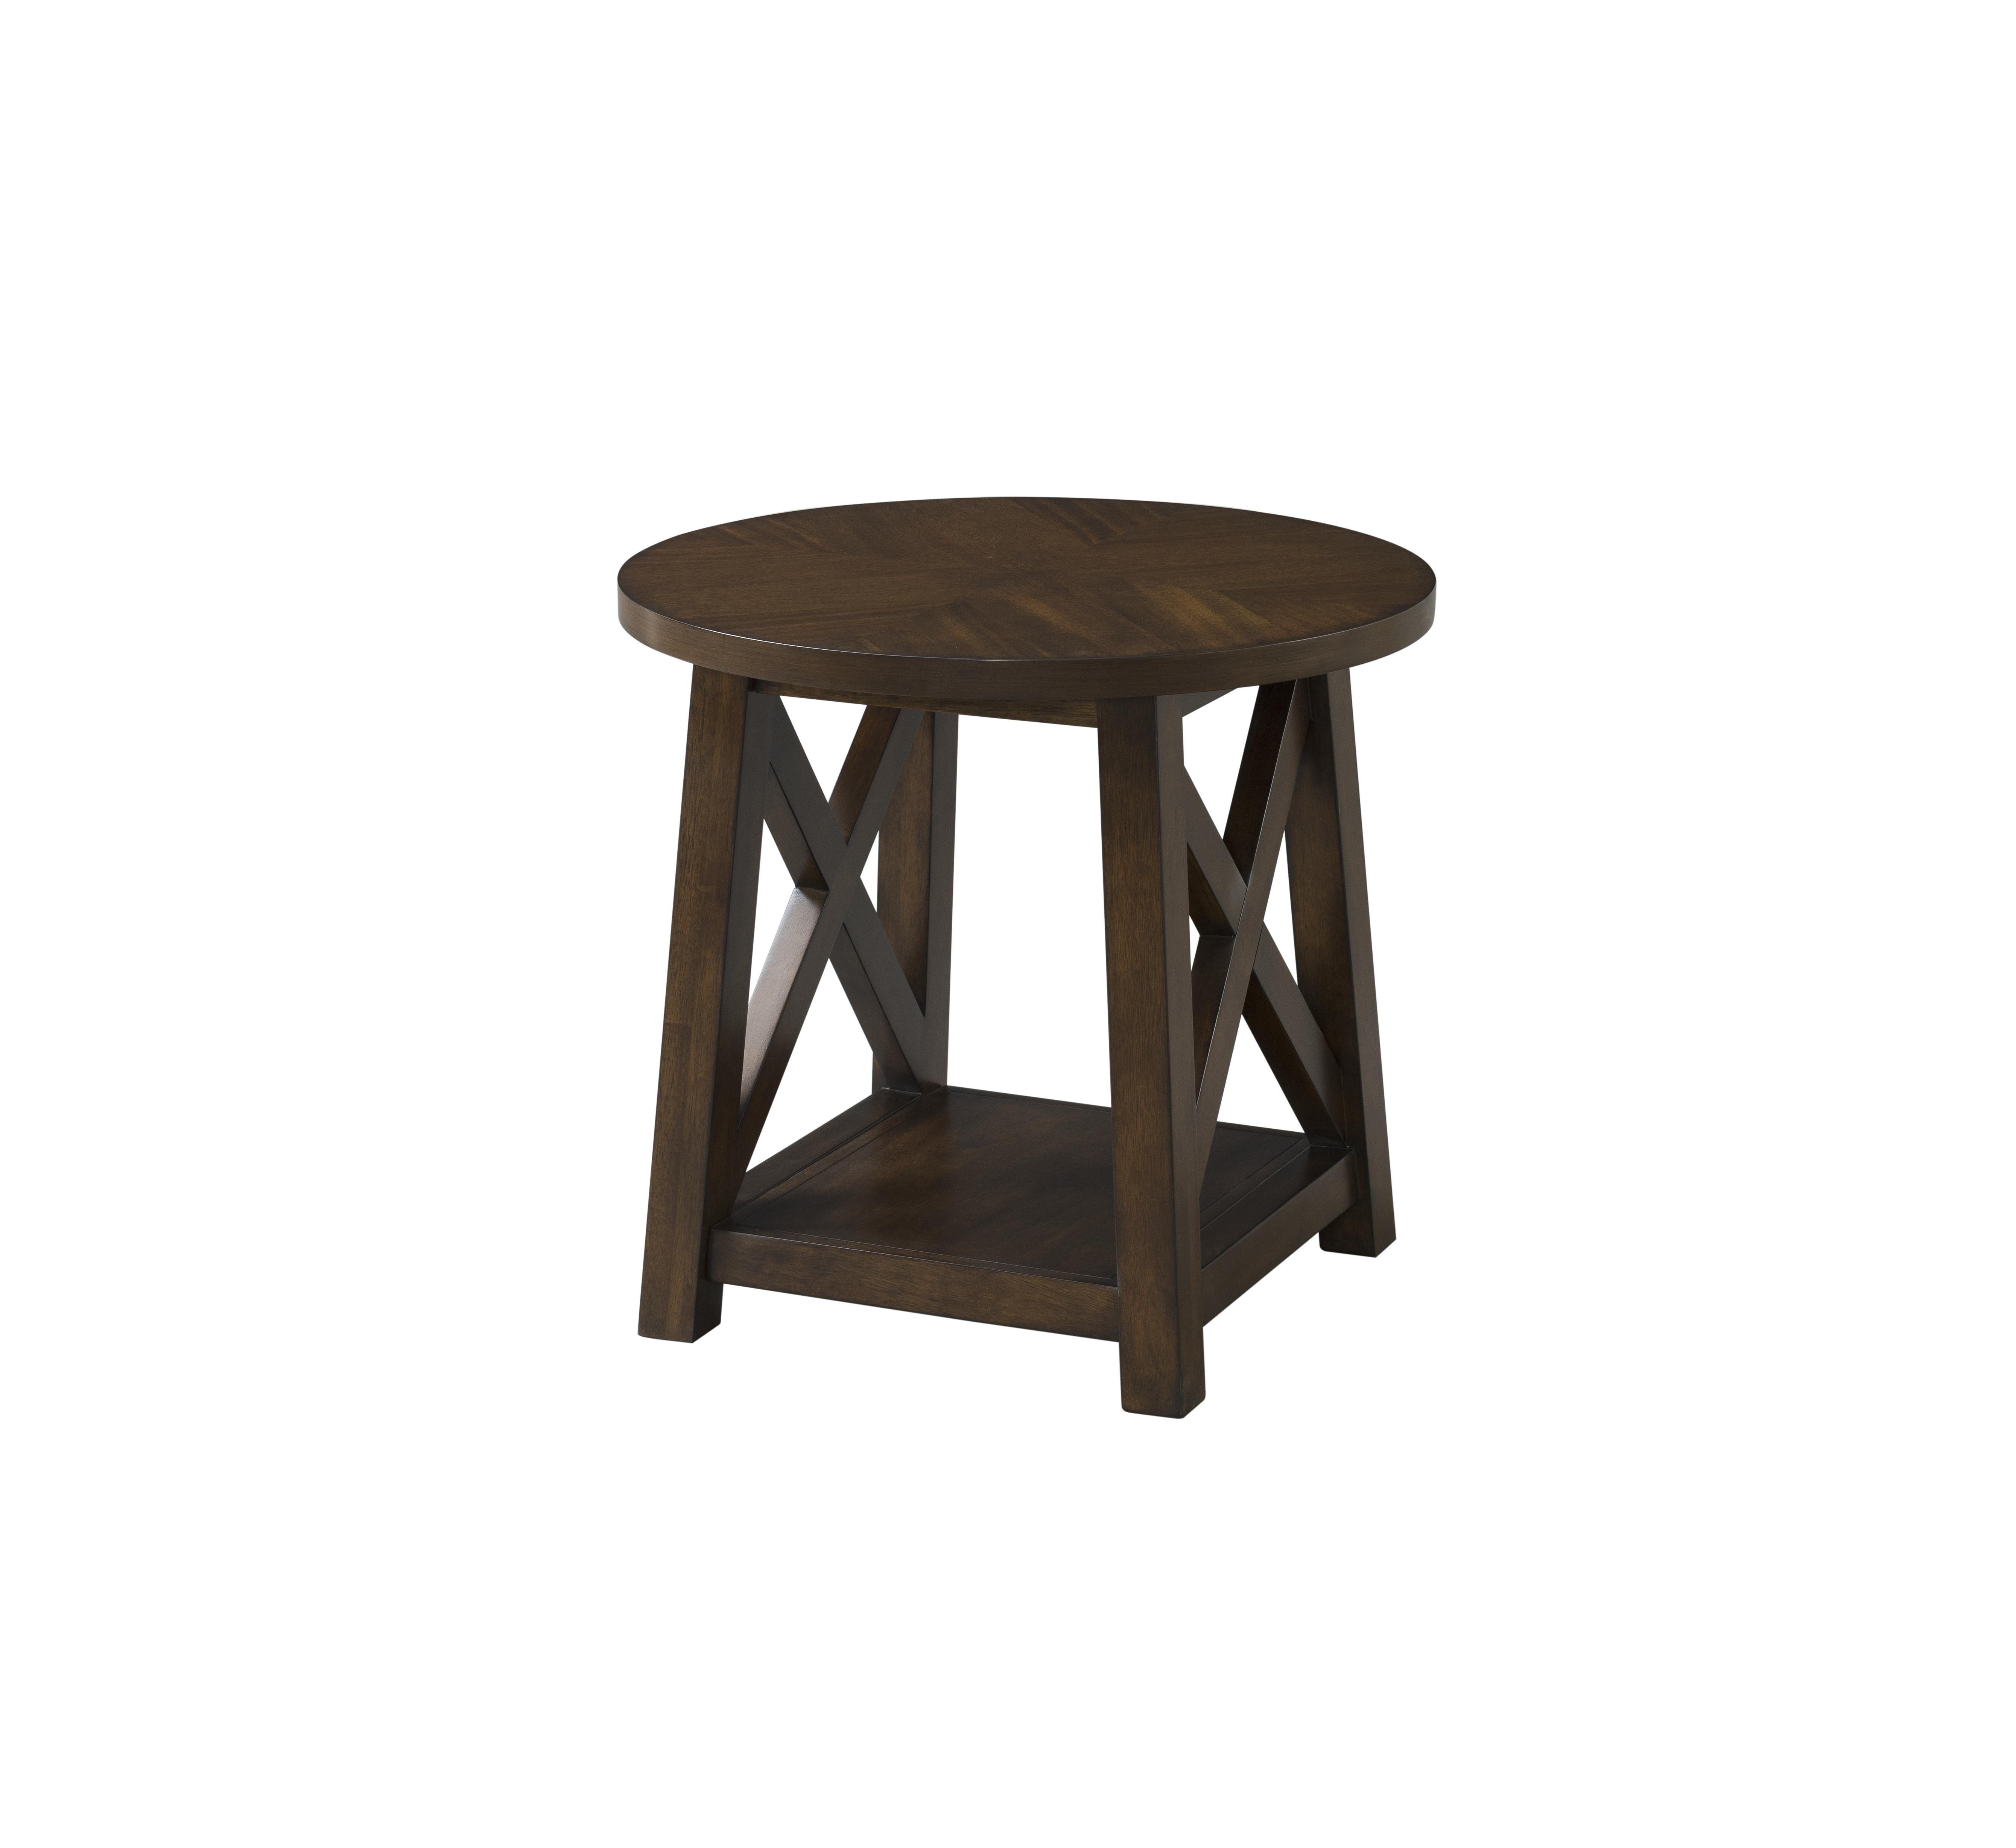 lane furniture brown cherry round end table the classy home lnf click enlarge modern wood accent acme company target side tables living room big quality amish oak and chairs